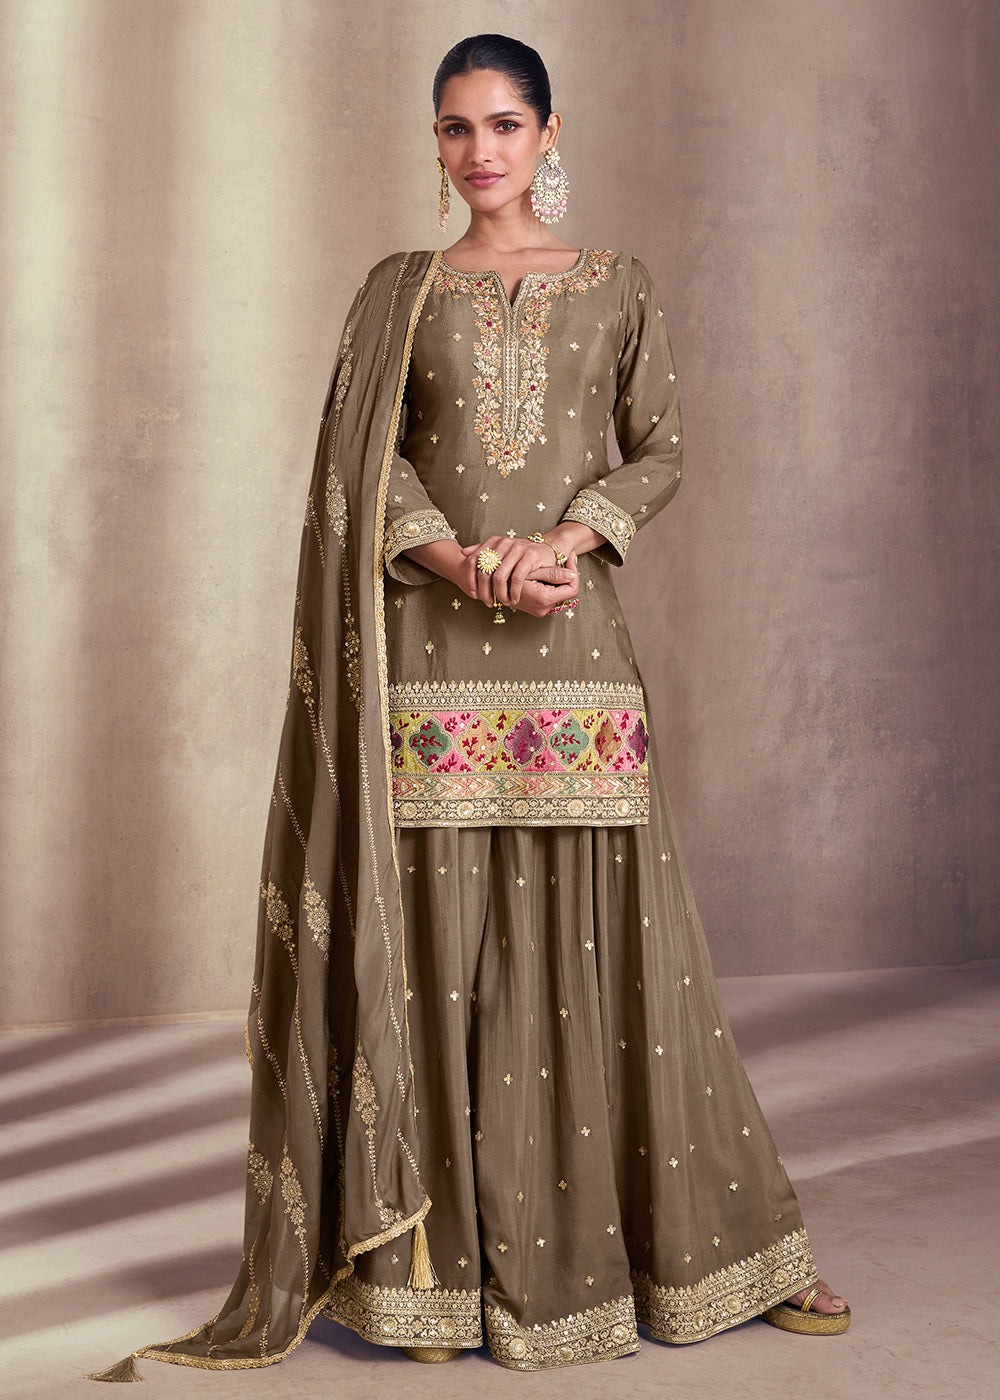 Shop Now Copper Brown Embroidered Festive Sharara Style Suit Online at Empress Clothing in USA, UK, Canada, Italy & Worldwide.